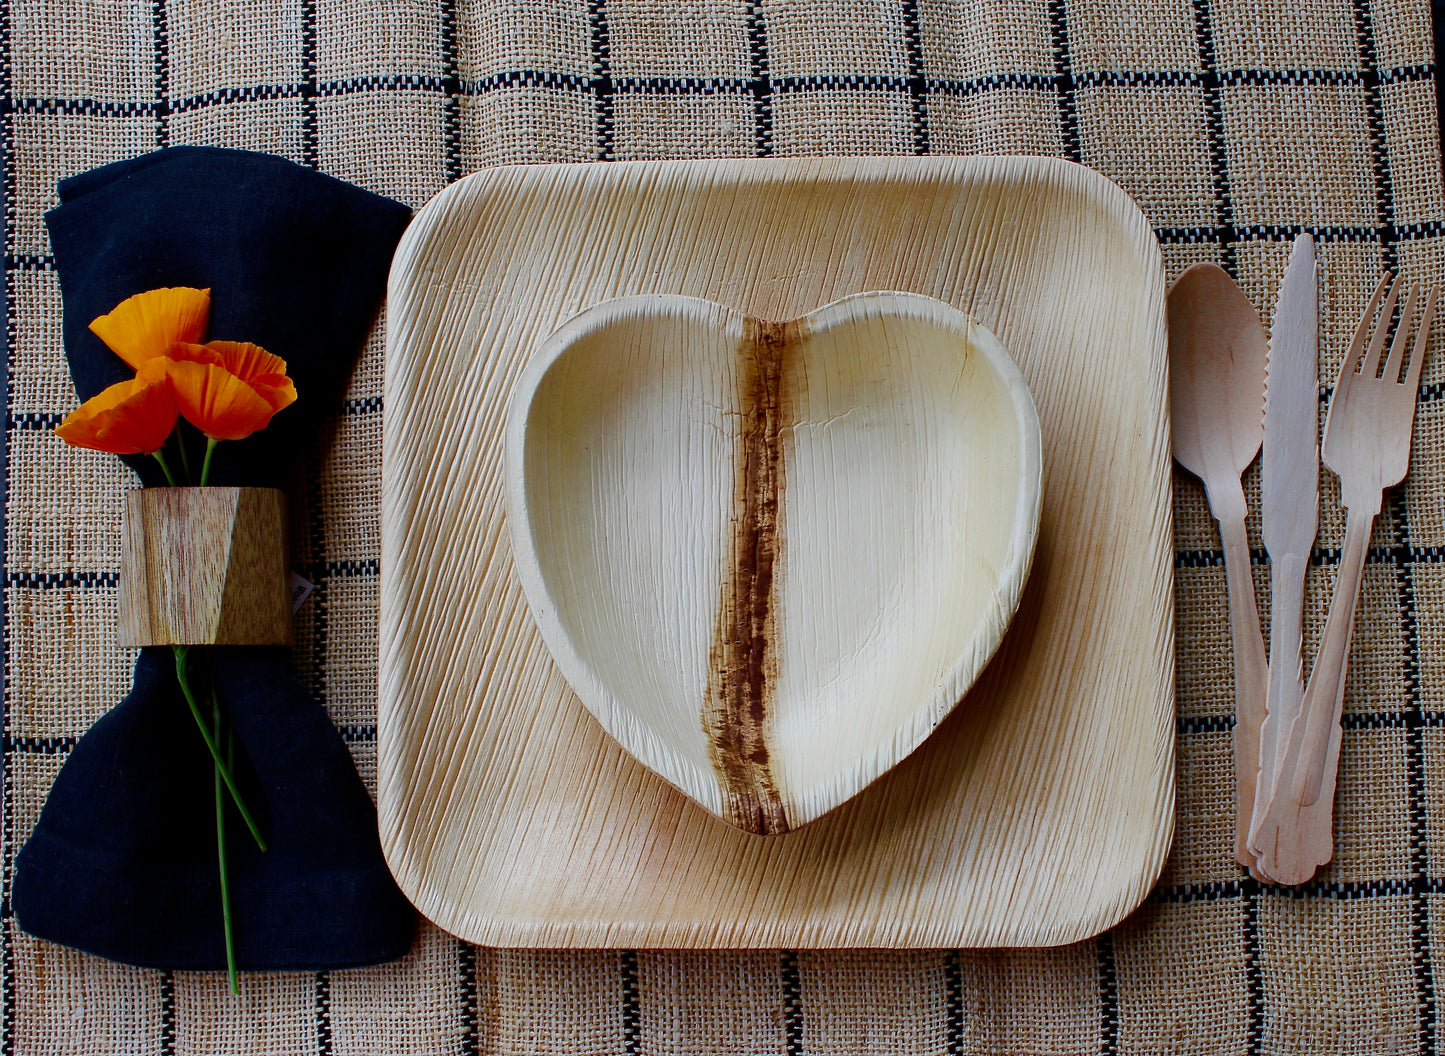 bBamboo Type Palm leaf plate 25 pices Square 10"  - 25pic 6"heart  and 75 pic cutlery  eco frindly - biodegrable - disposable - compostable